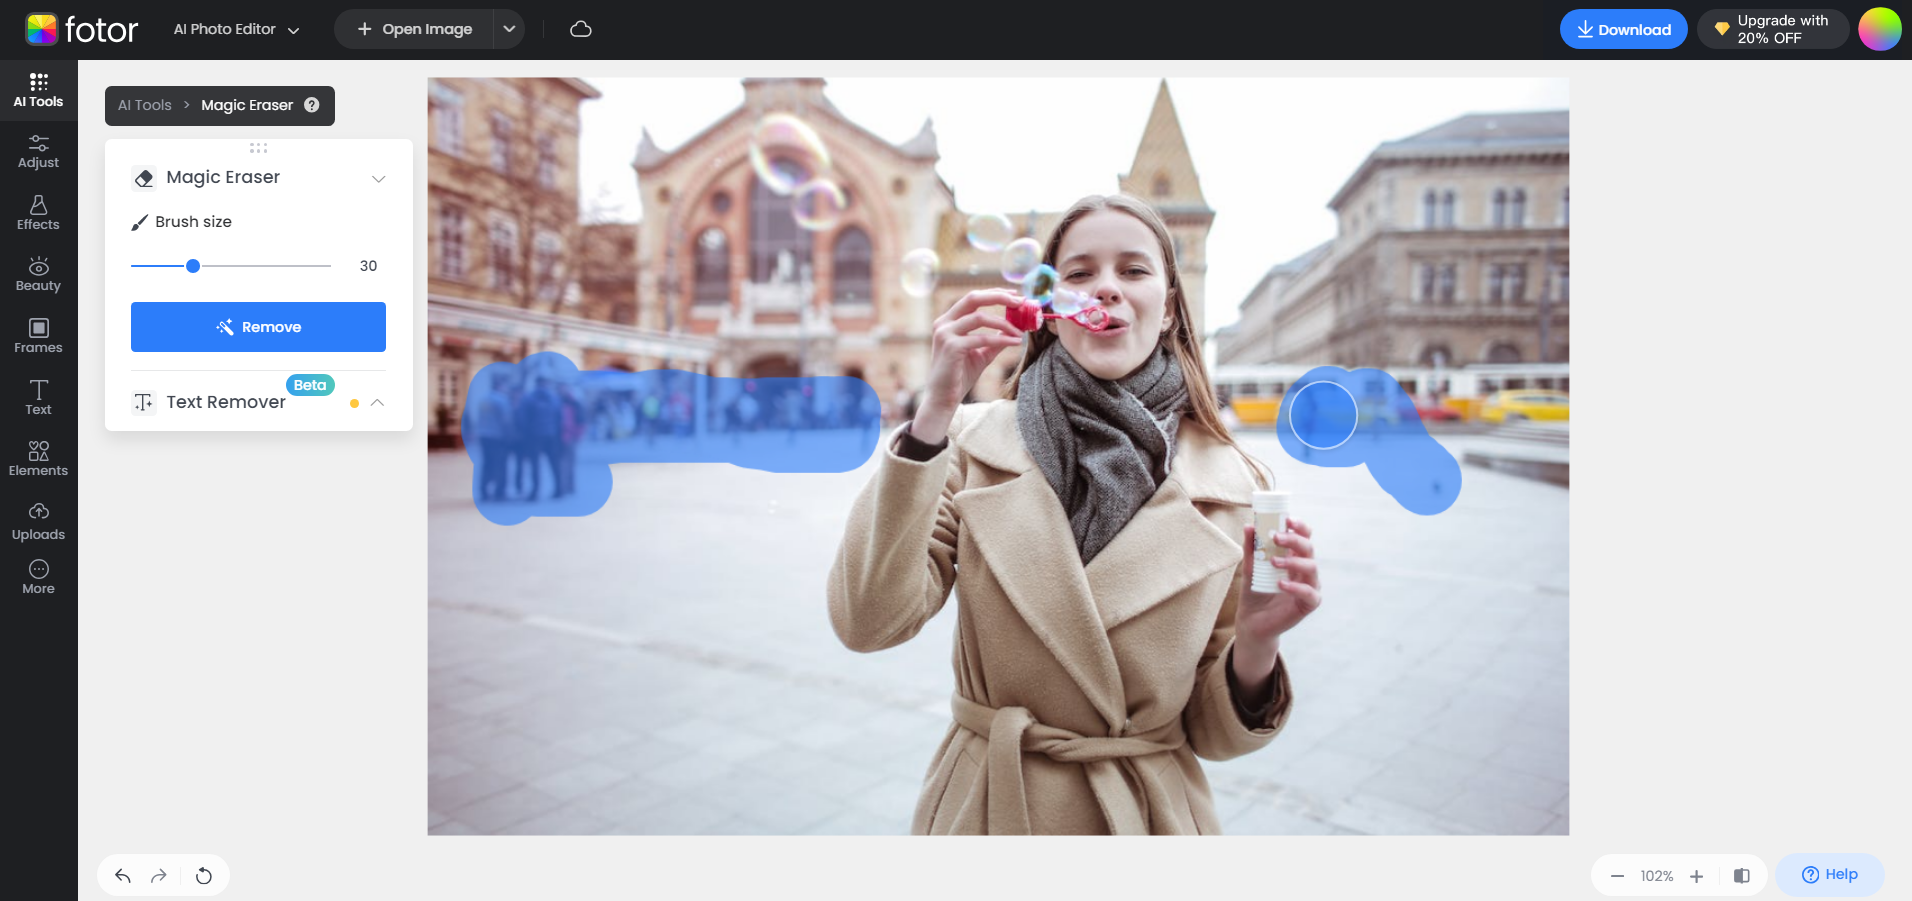 use fotor online object remover to remove passersby from image